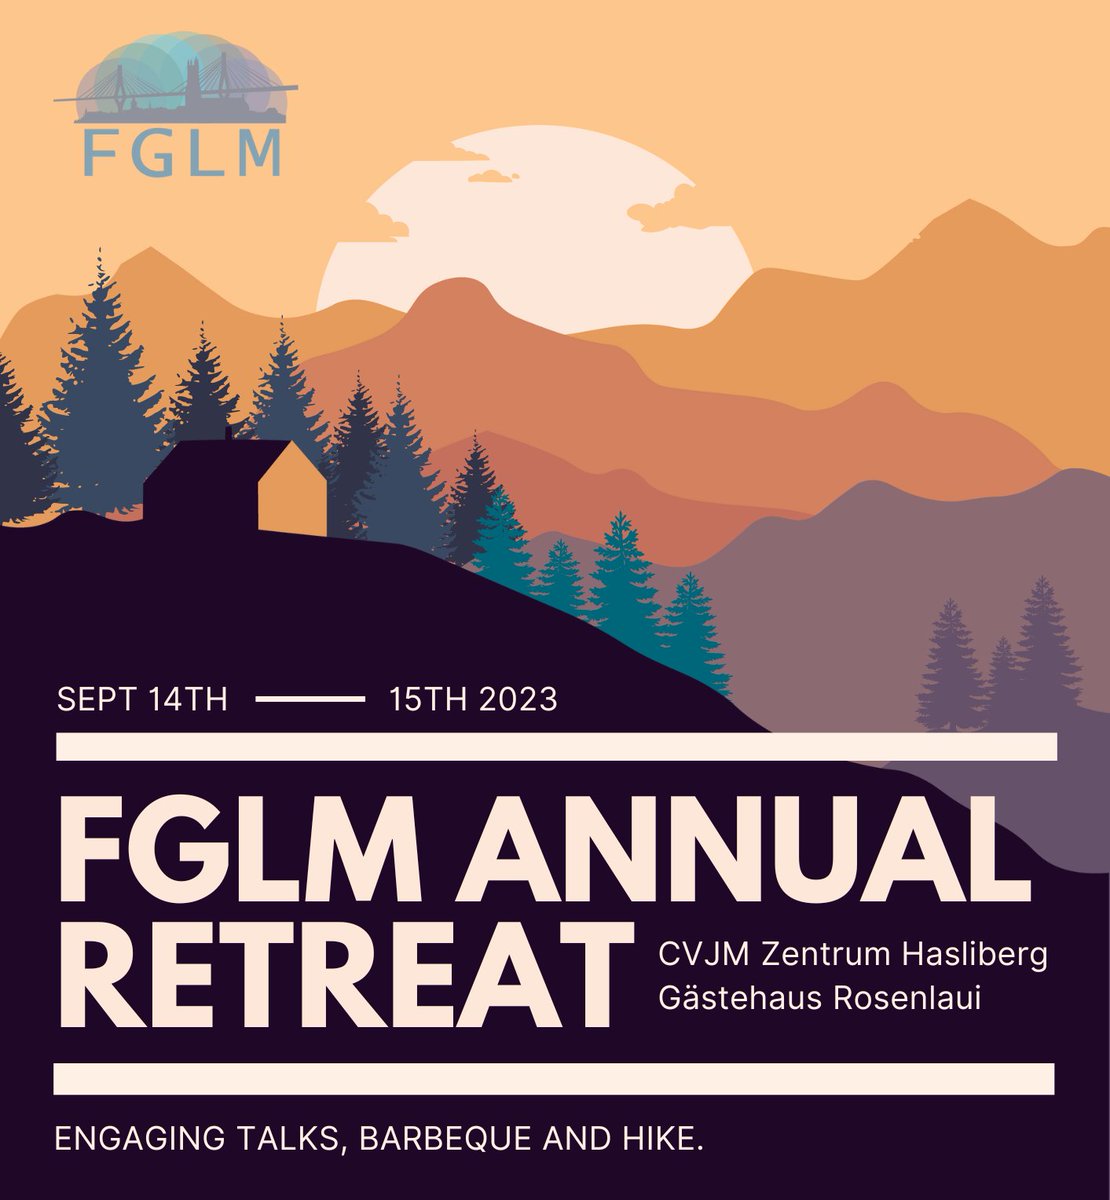 📢 Exciting news! Registration is now open for the FGLM Annual Retreat in Hasliberg, Bernese Oberland. Join us for two incredible days of discovery, connection, and breathtaking landscapes. Don't miss out on this unforgettable experience! forms.gle/SDVPv1ZjfexMVZ…